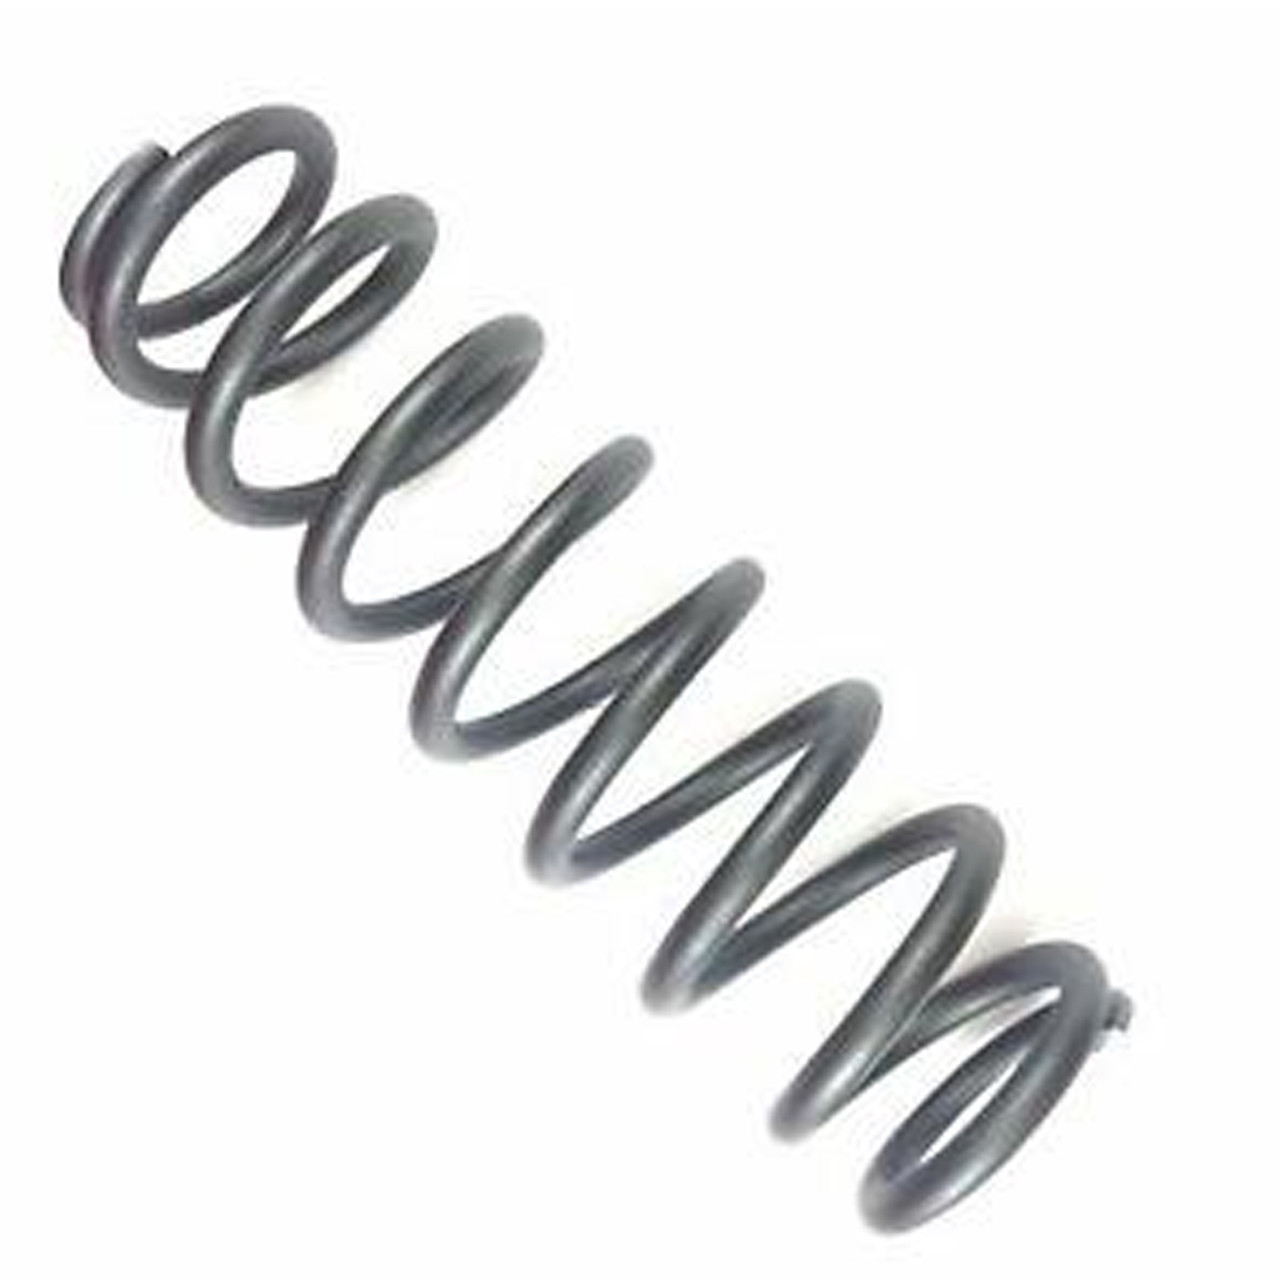 Can-Am New OEM, Ryker 2-UP Rear Spring (Recommended for 2-UP Riding), 219400974